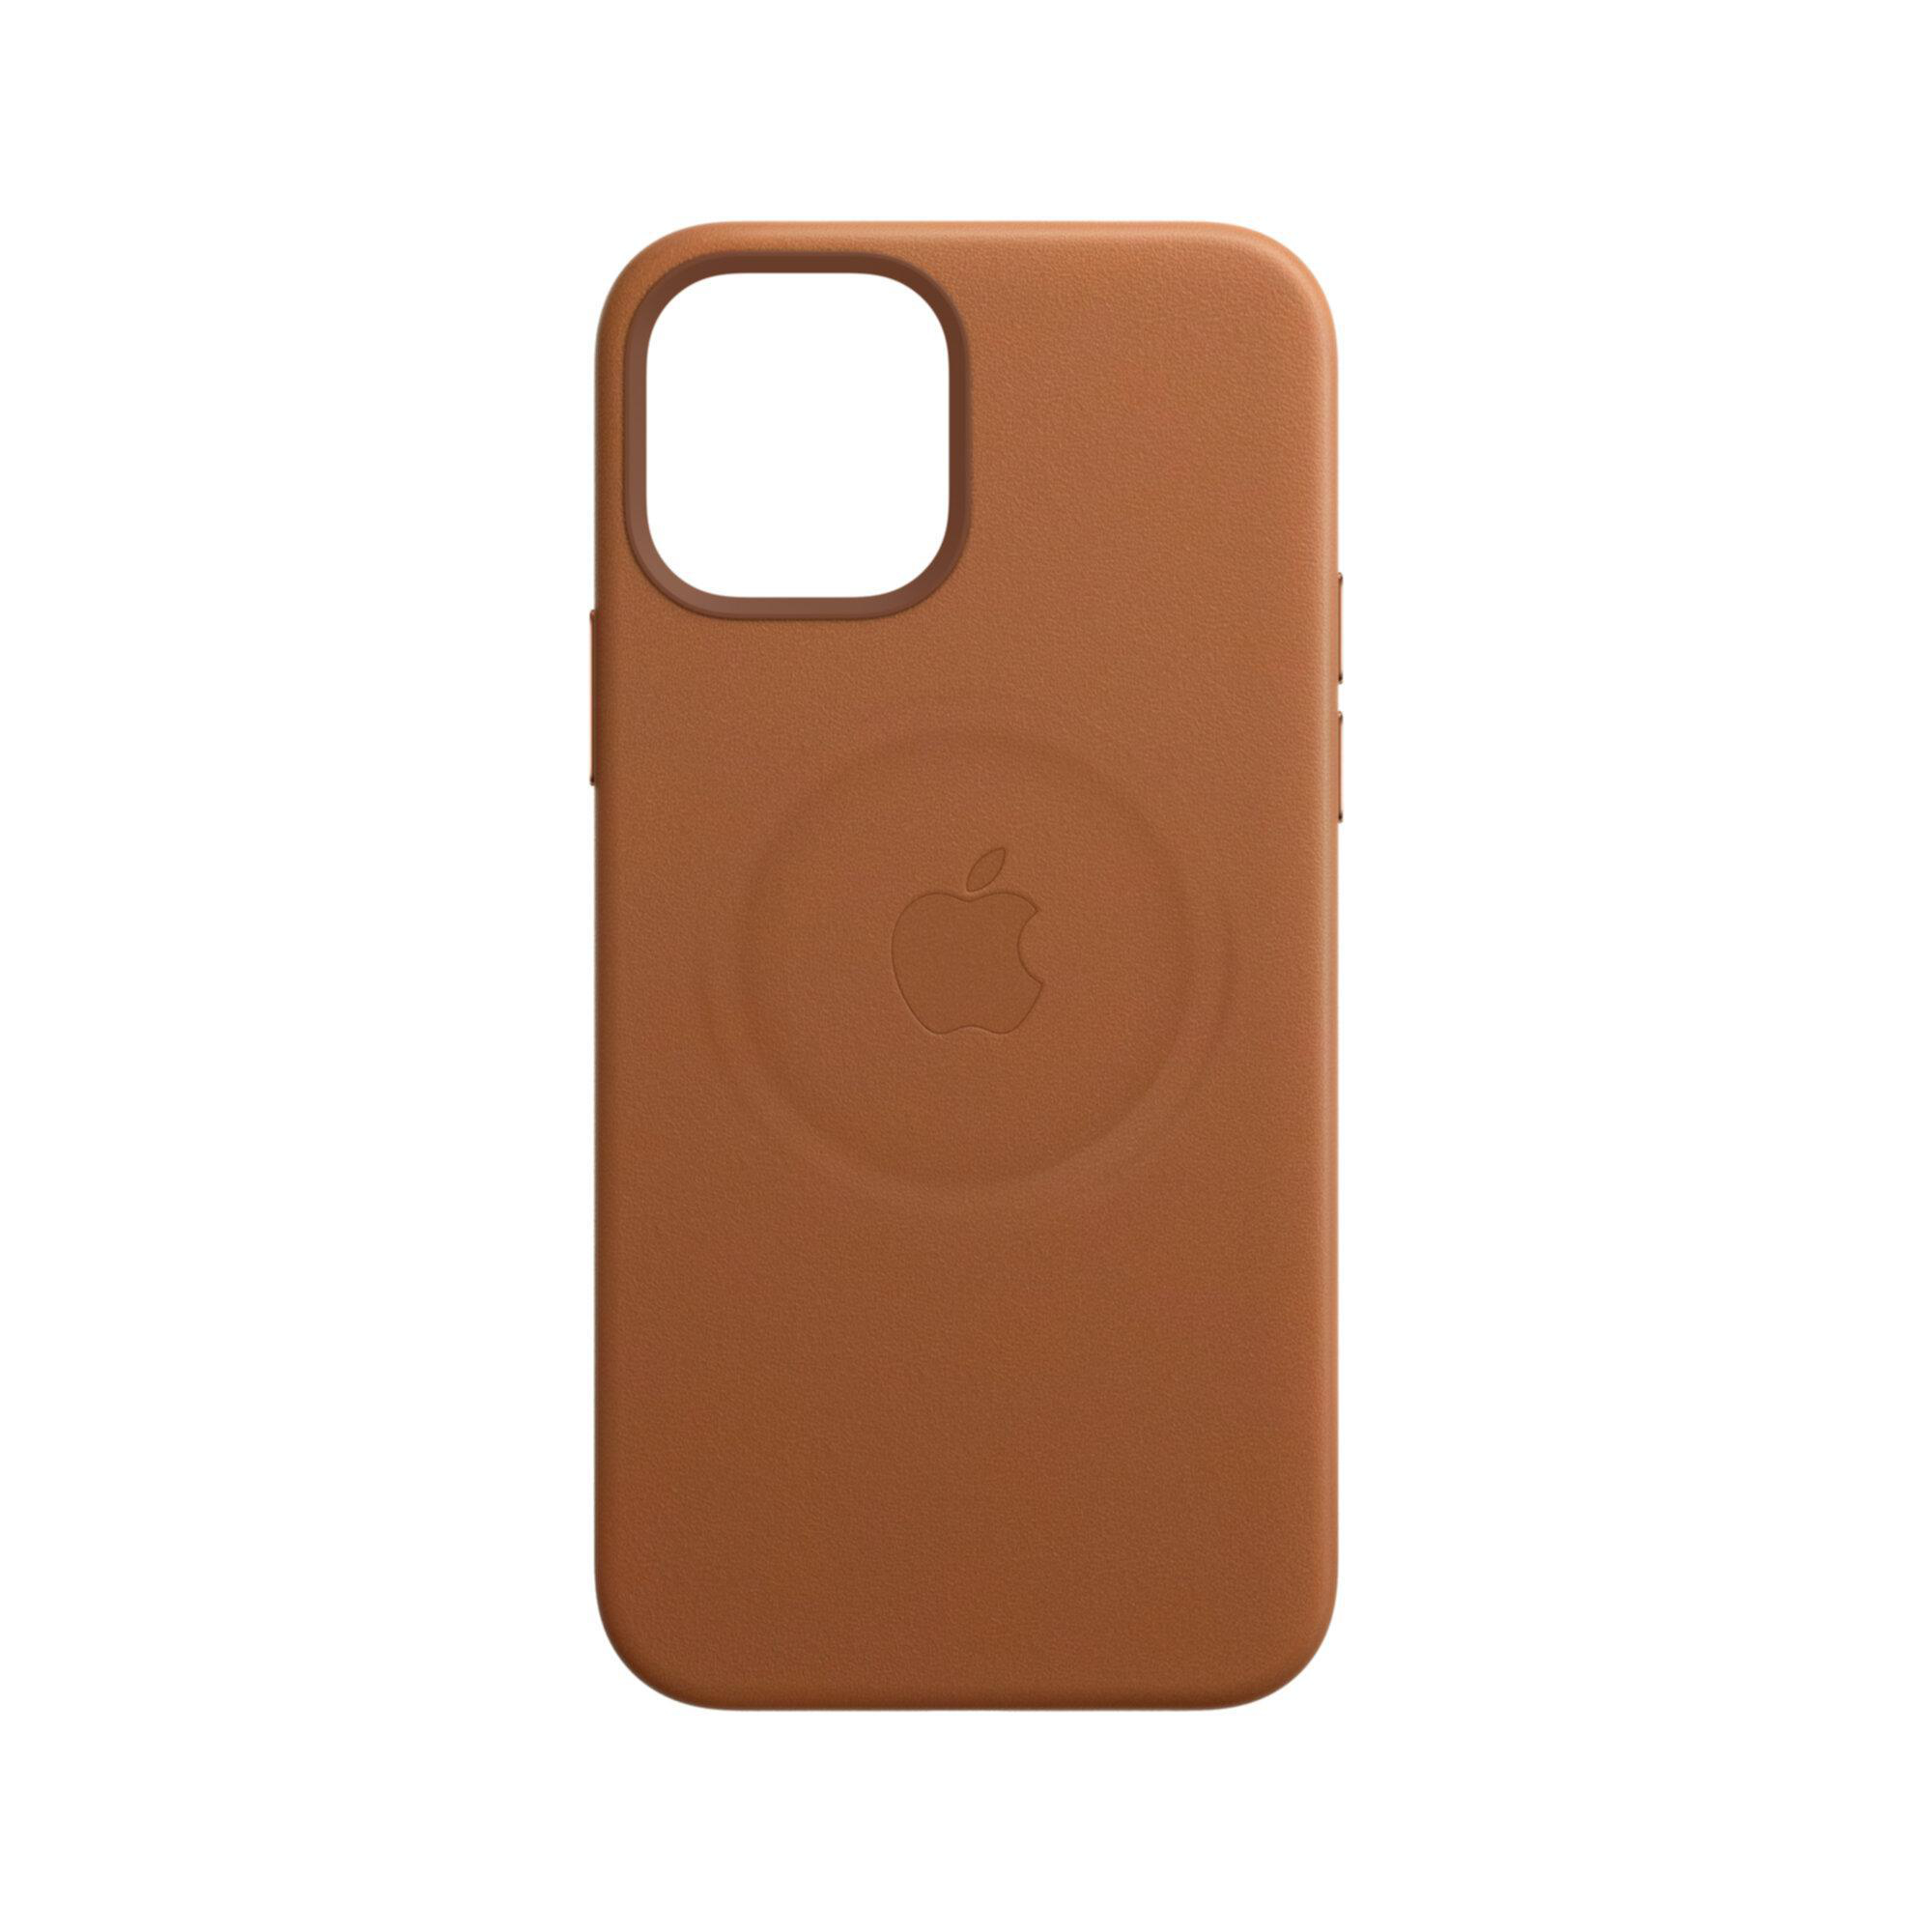 iPhone Saddle 12 Backcover, Apple, MHKL3ZM/A , Max, Pro Brown APPLE